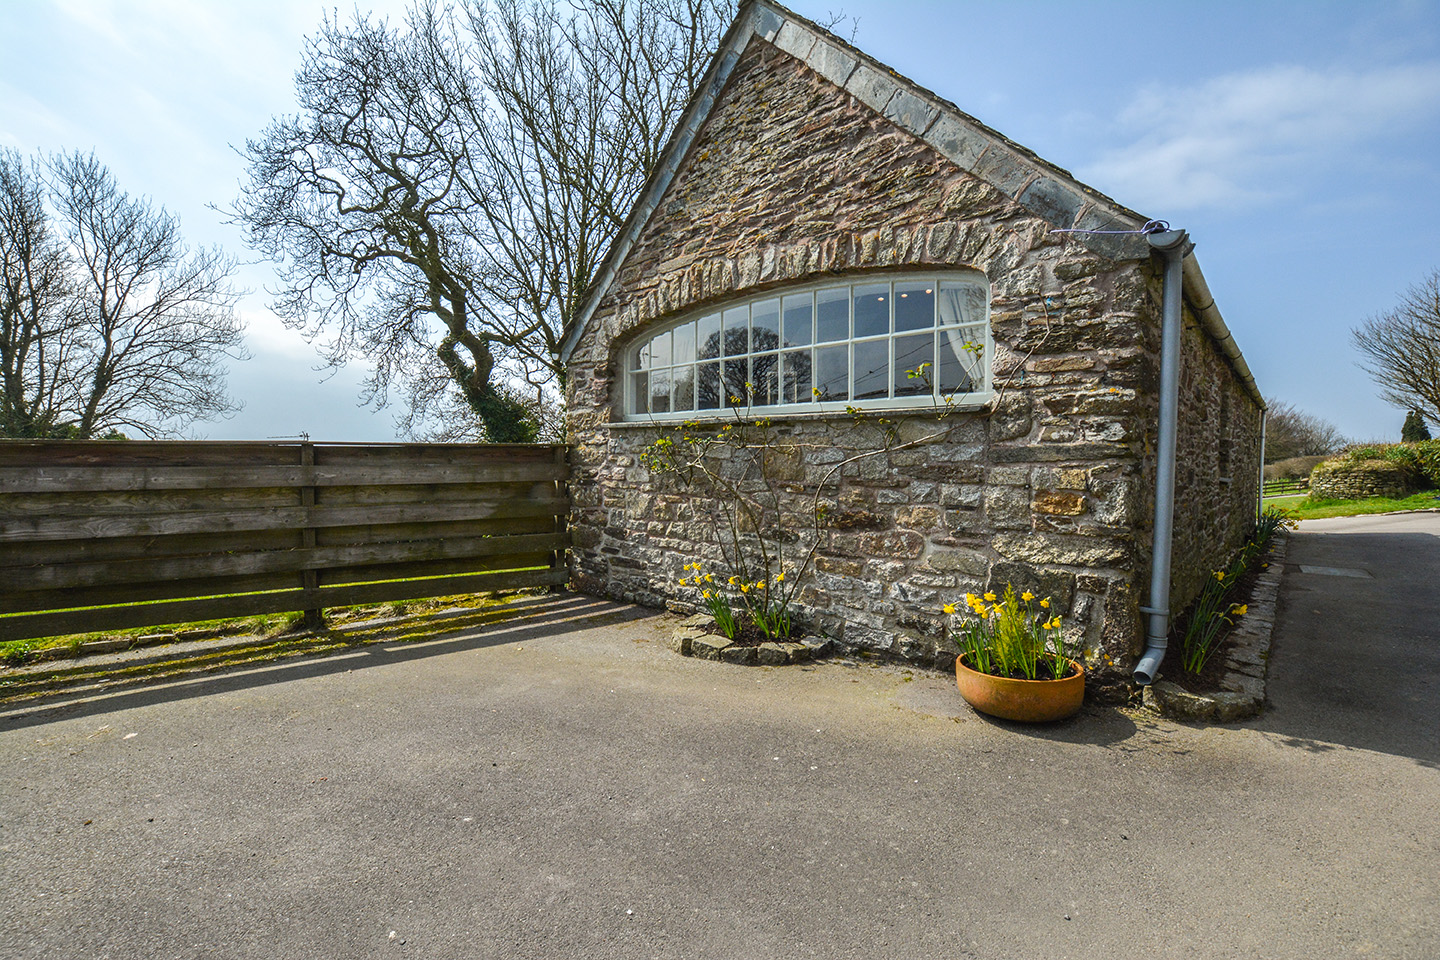 The outside of Jingles luxury self catering holiday cottage at Penrose Burden in North Cornwall near Bodmin Moor02.jpg